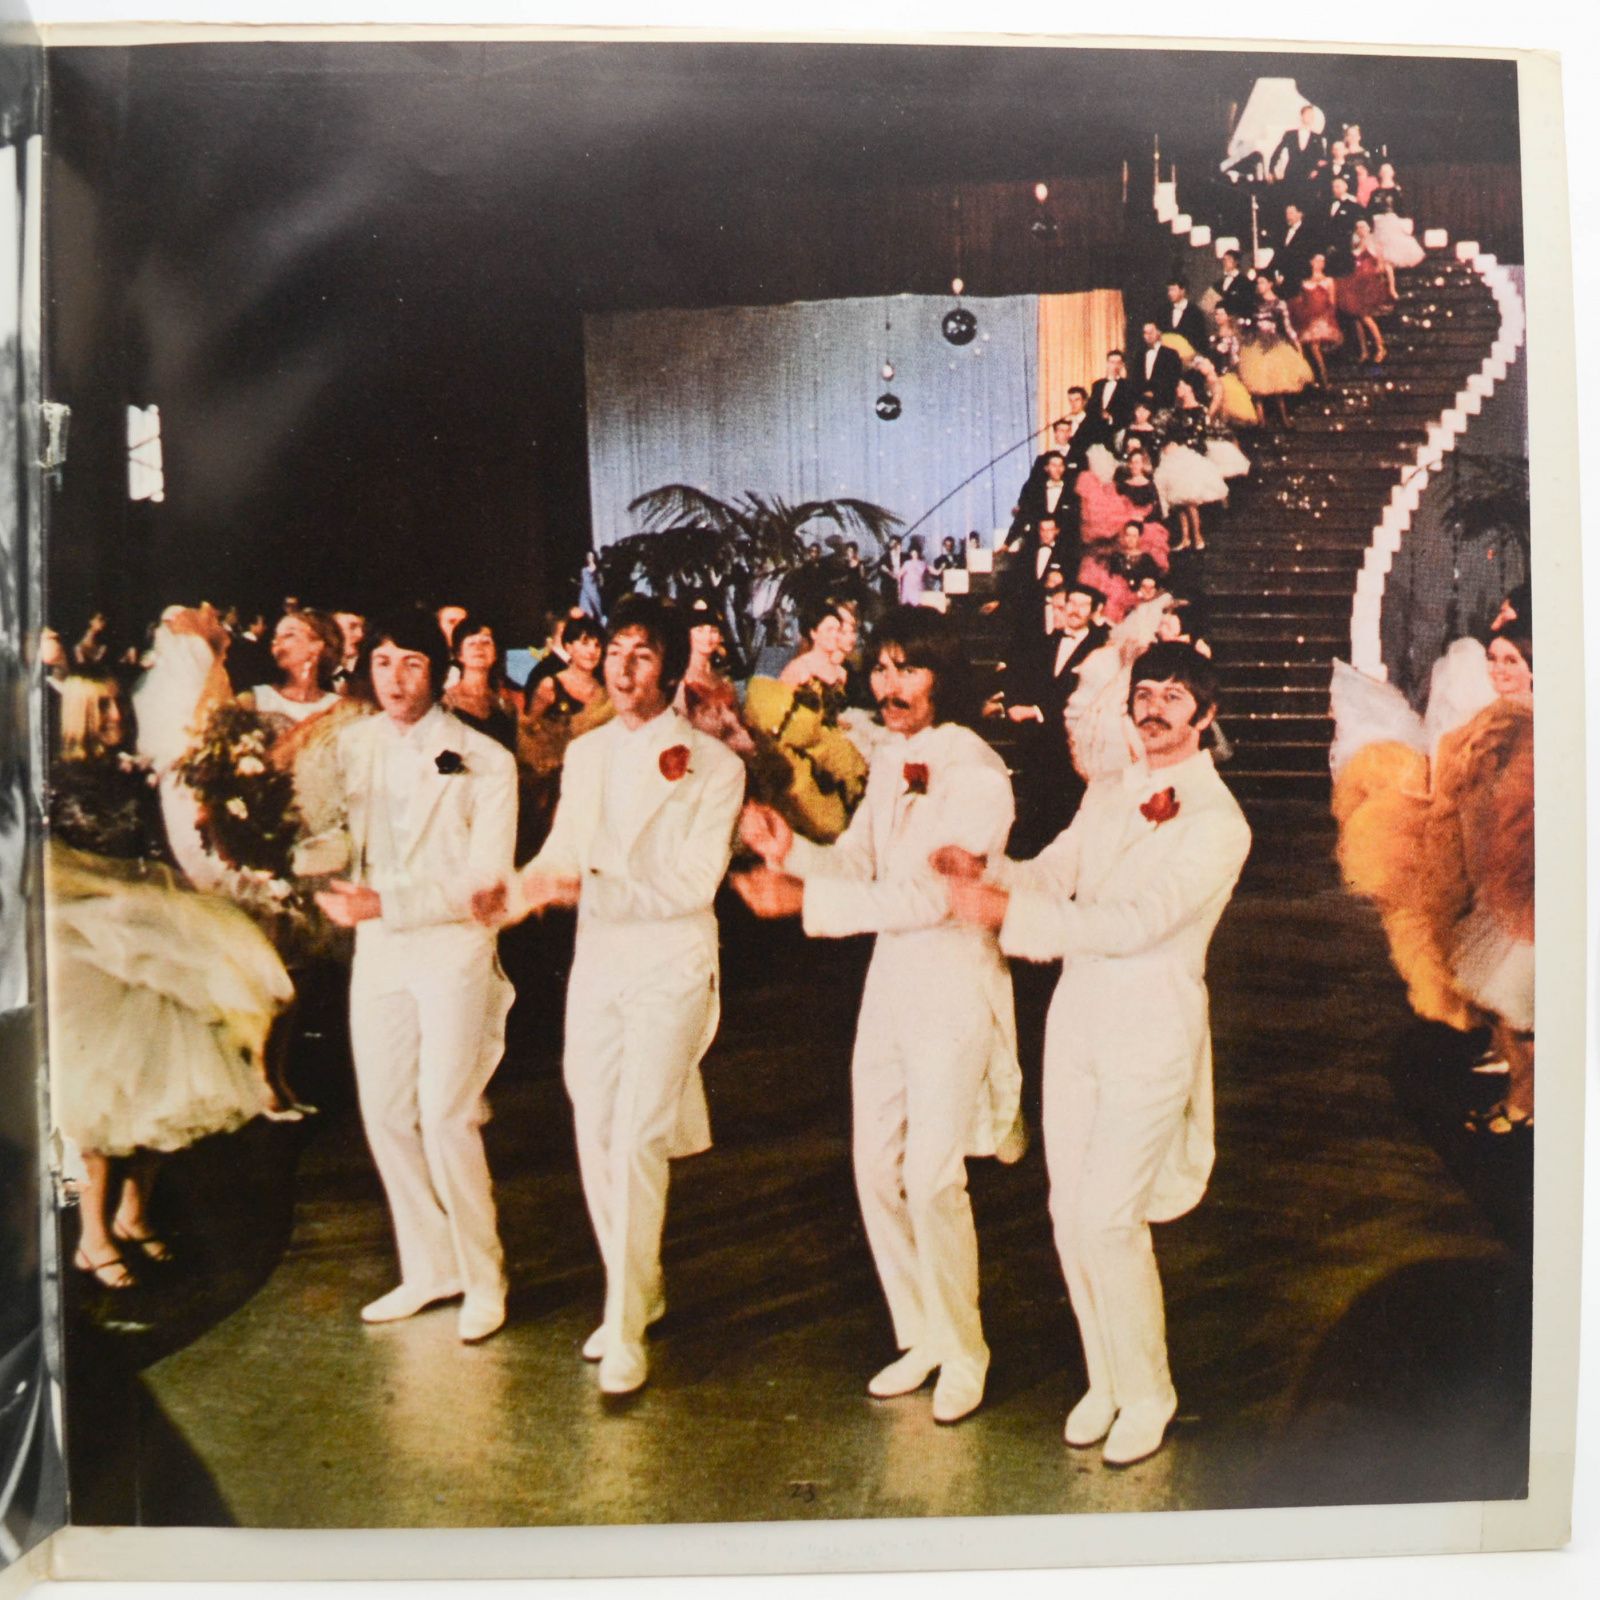 Beatles — Magical Mystery Tour (USA, booklet), 1967